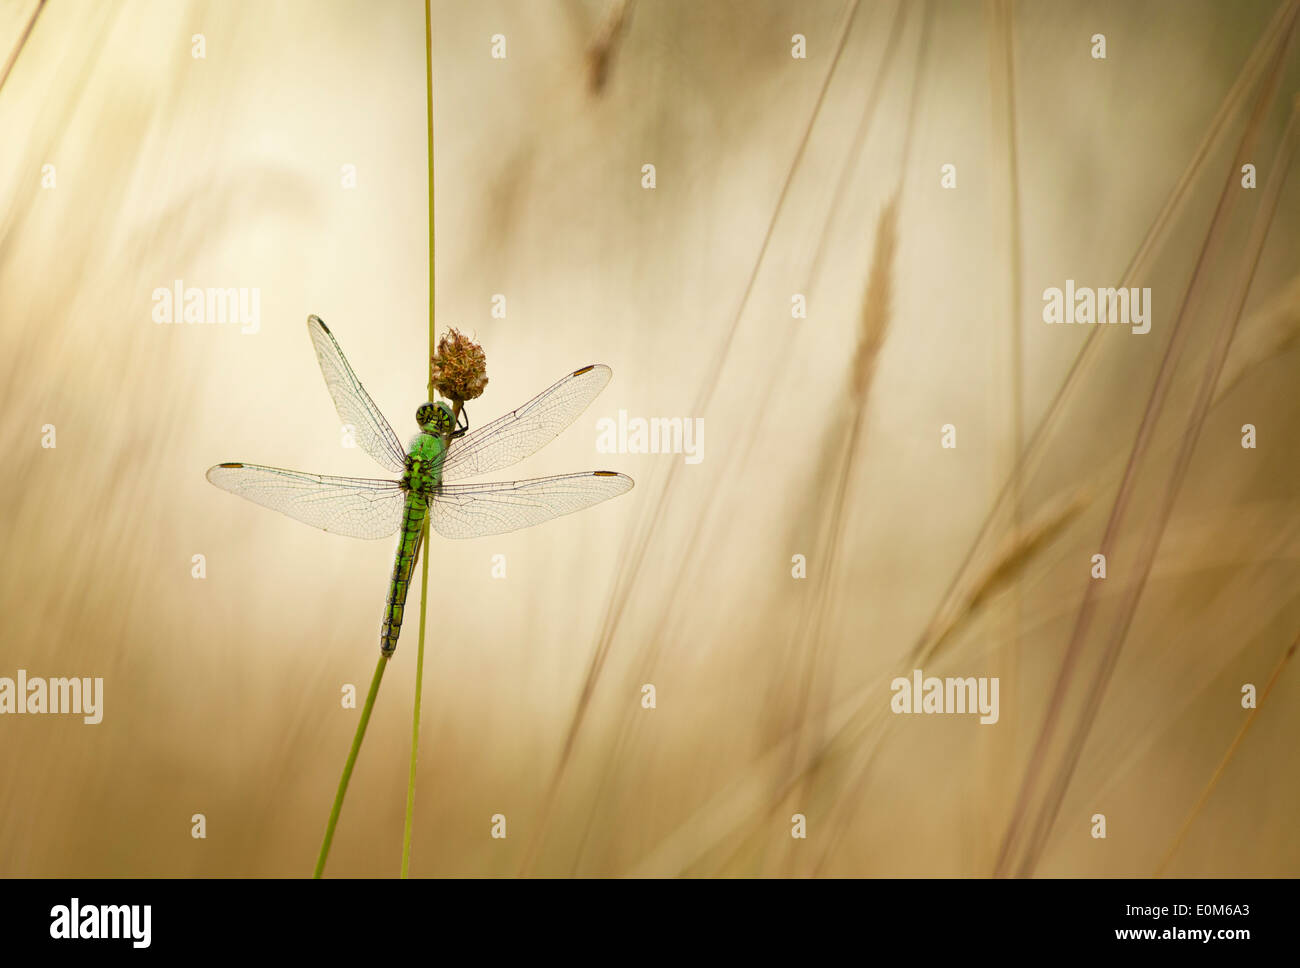 A Green Darner dragonfly waits for the warning rays of the morning sun, Oregon, USA (Anax junius) Stock Photo